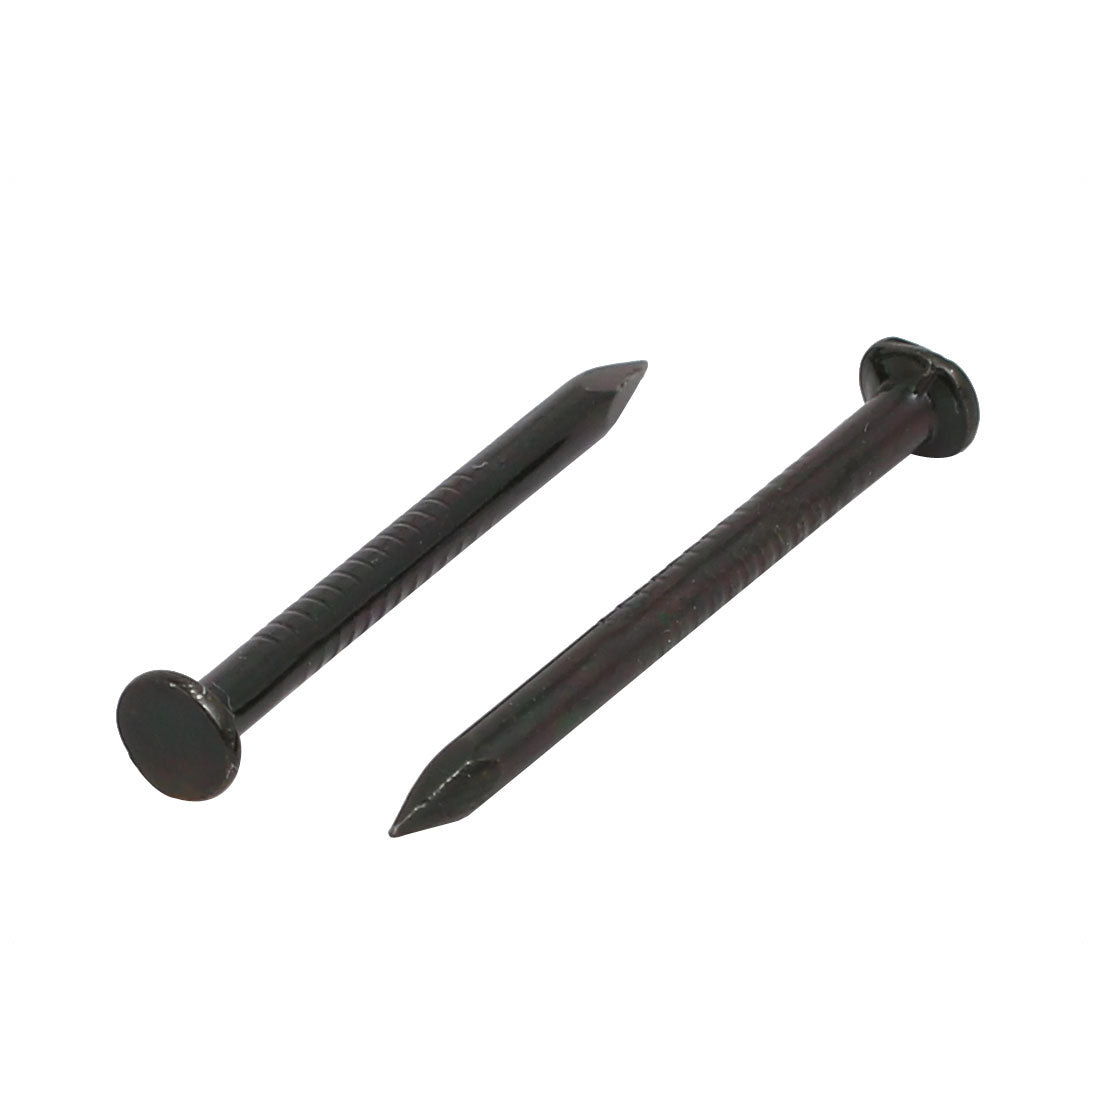 uxcell Uxcell 2mm x 25mm Fiber Concrete Cement Wall Point Tip Nails Black 30pcs